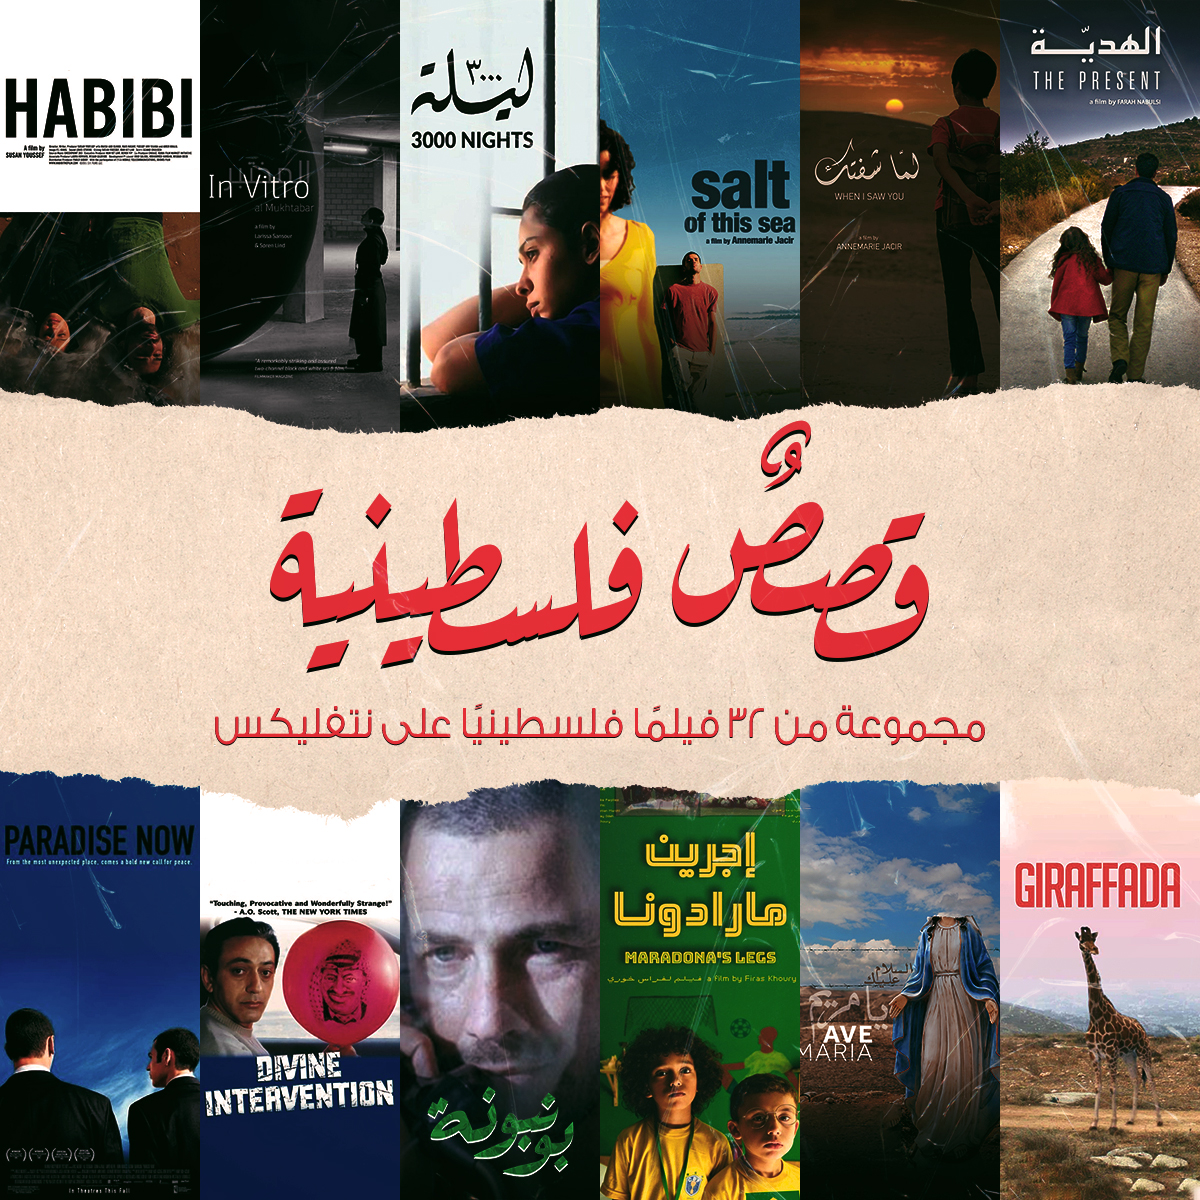 Netflix launches ‘Palestinian Stories’ collection with award-winning films